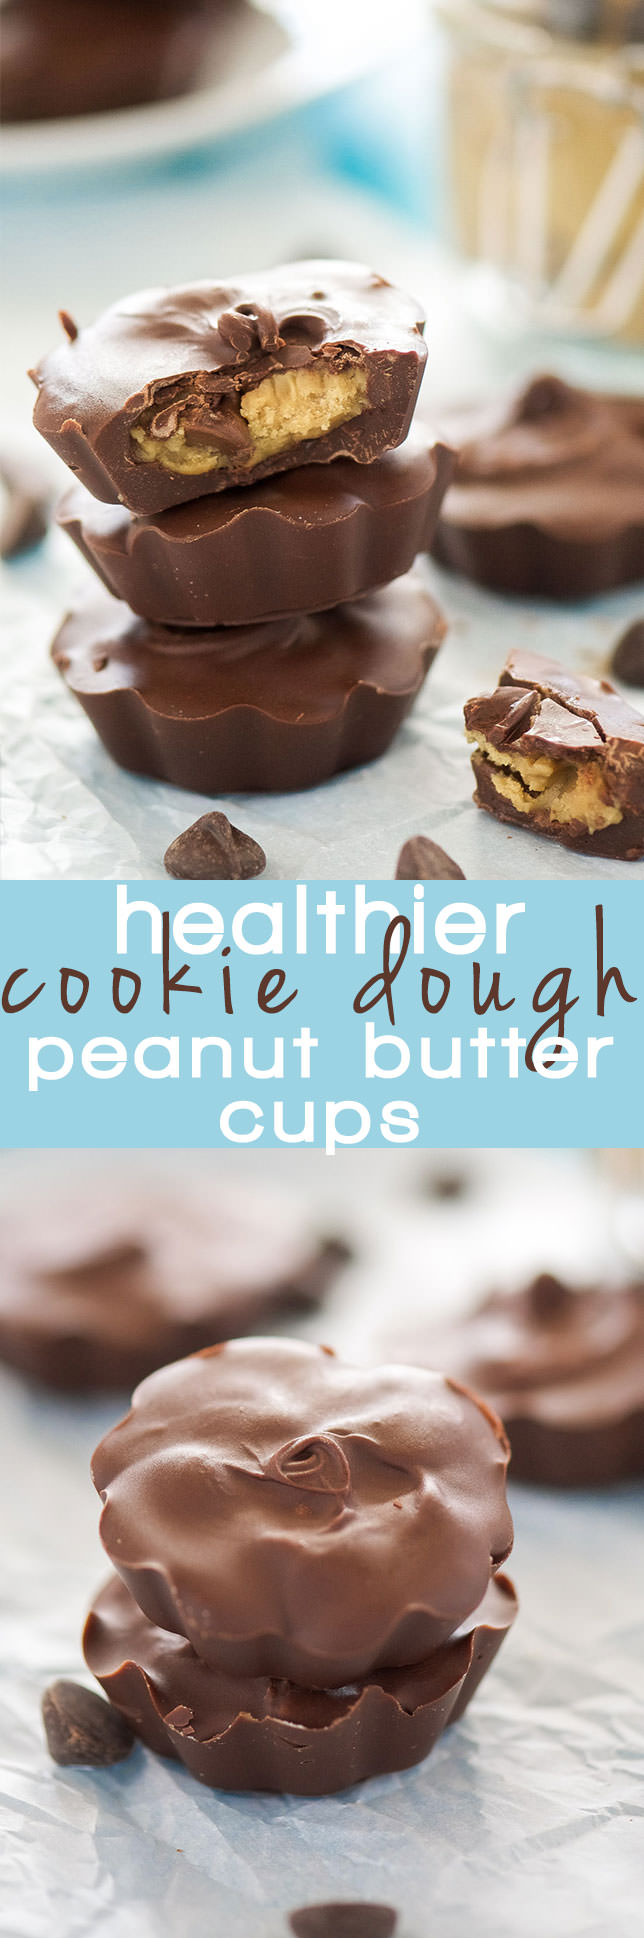 Healthy Cookie Dough Peanut Butter Cups are a upgraded, homemade peanut butter cups! Stuffed with skinny peanut butter cookie dough, these cups are perfect for holidays or to beat that sweet tooth!